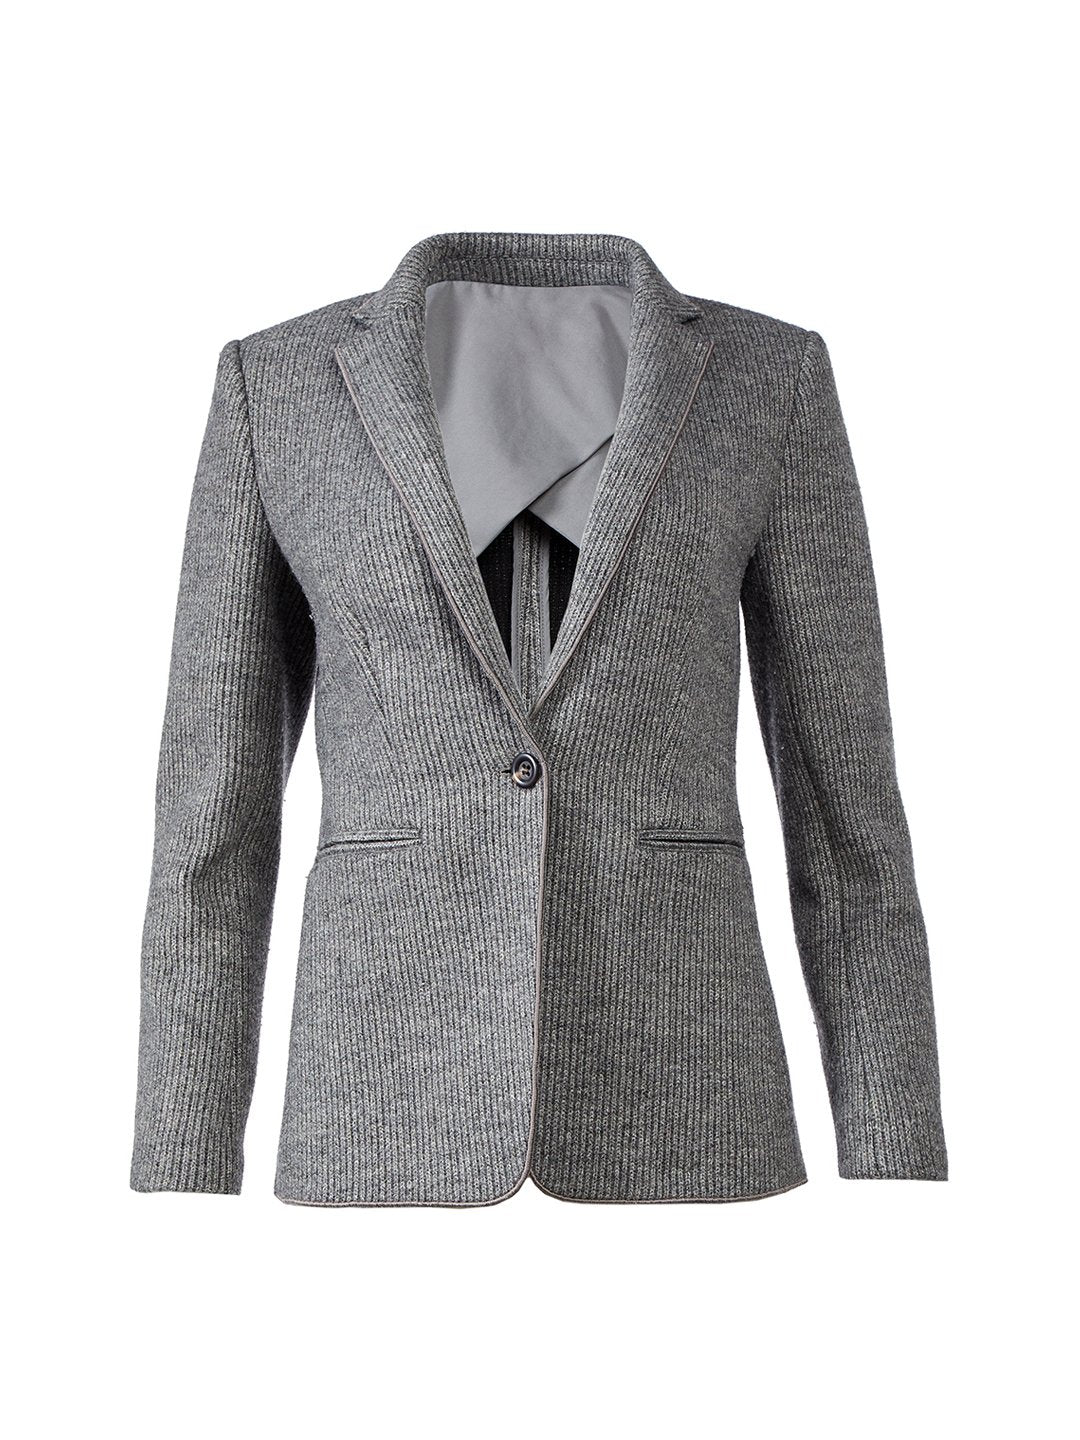 Ann Taylor | The Hutton Blazer in Sweater Knit in Light Charcoal Heather |  Bird Style Box